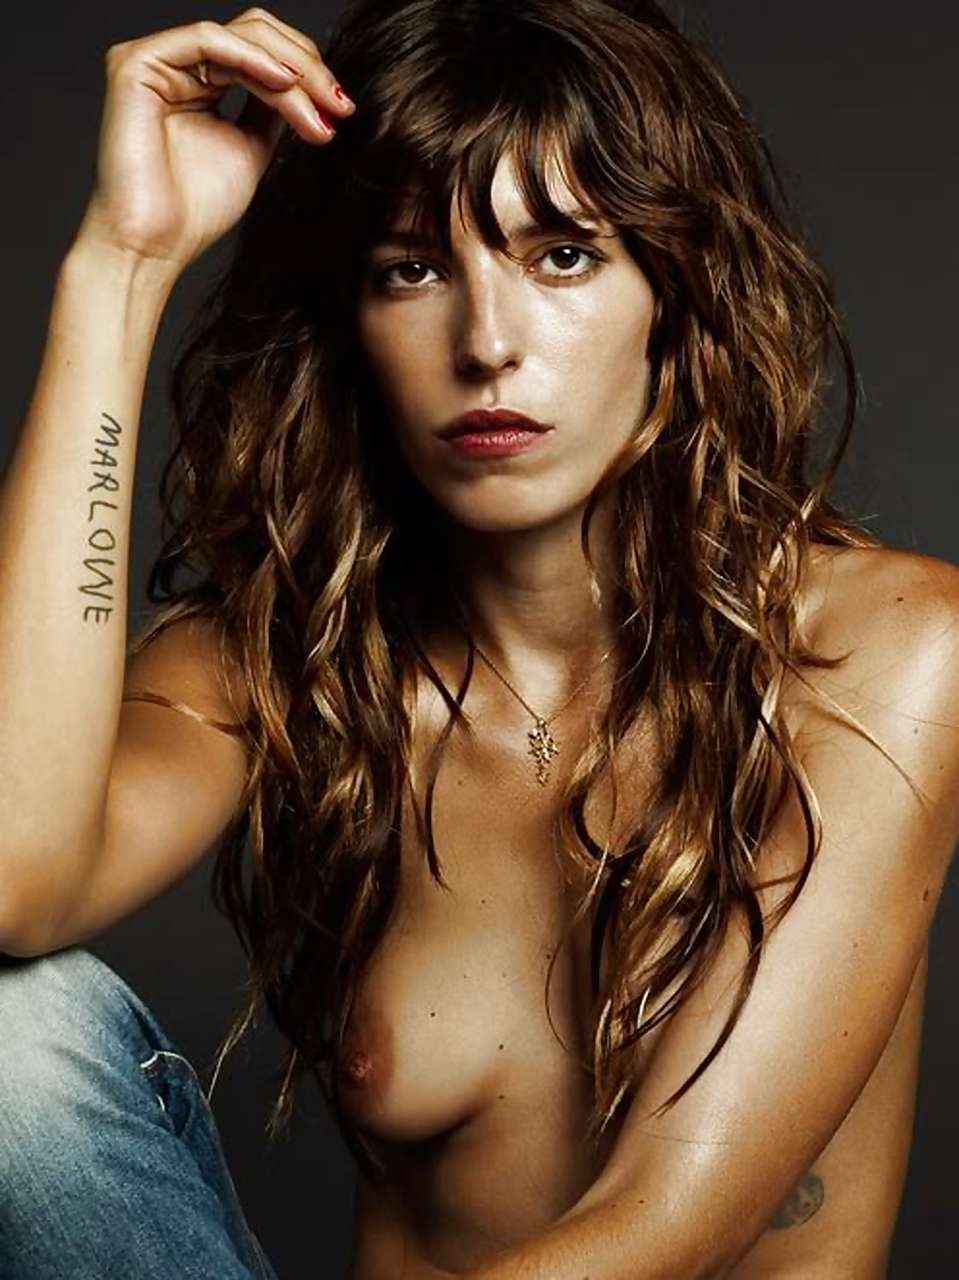 Lou Doillon showing her nice tits and hairy pussy in some photoshoot #75299773